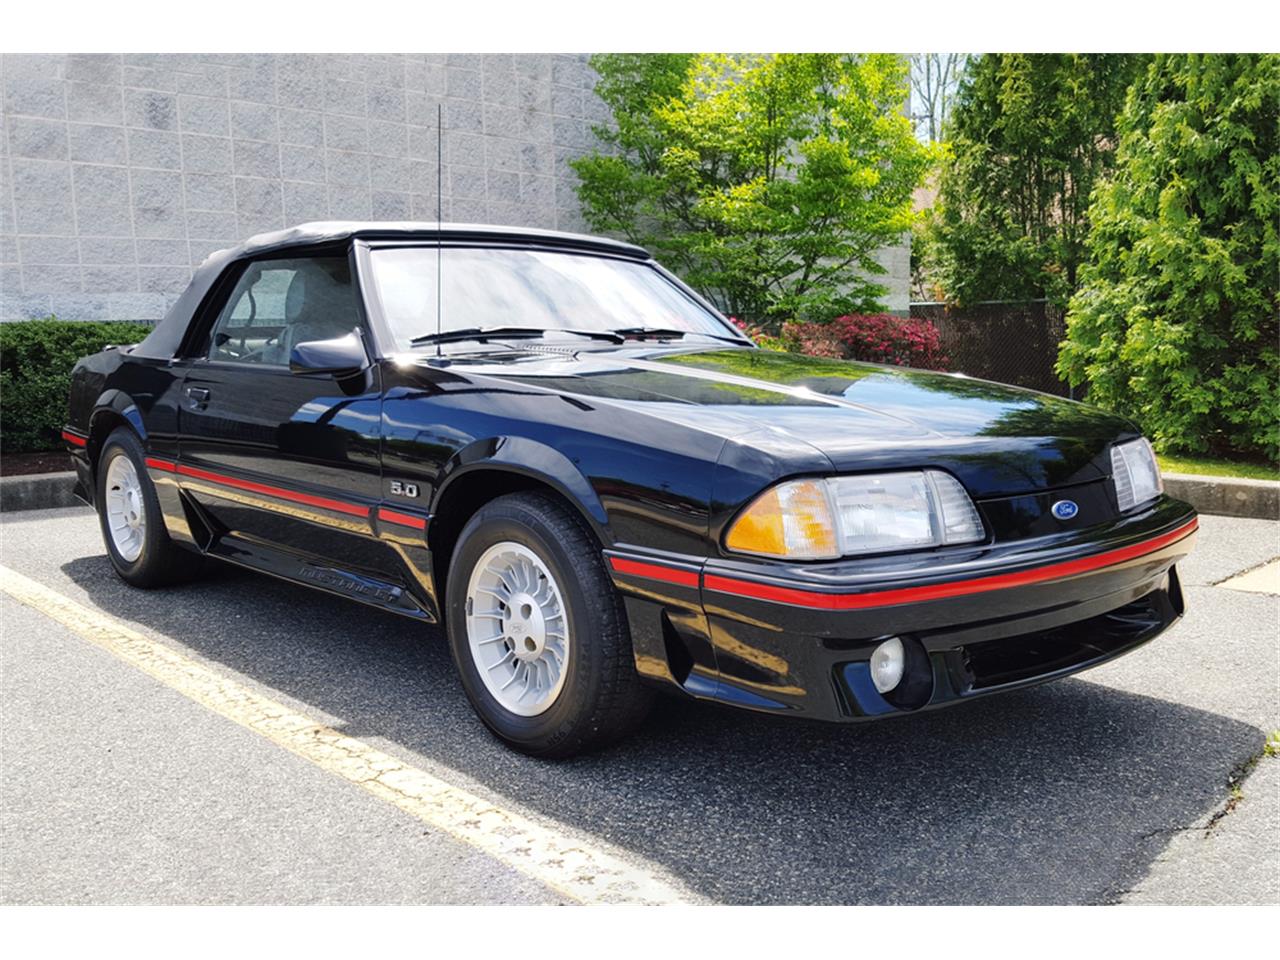 Black 1987 Ford Mustang